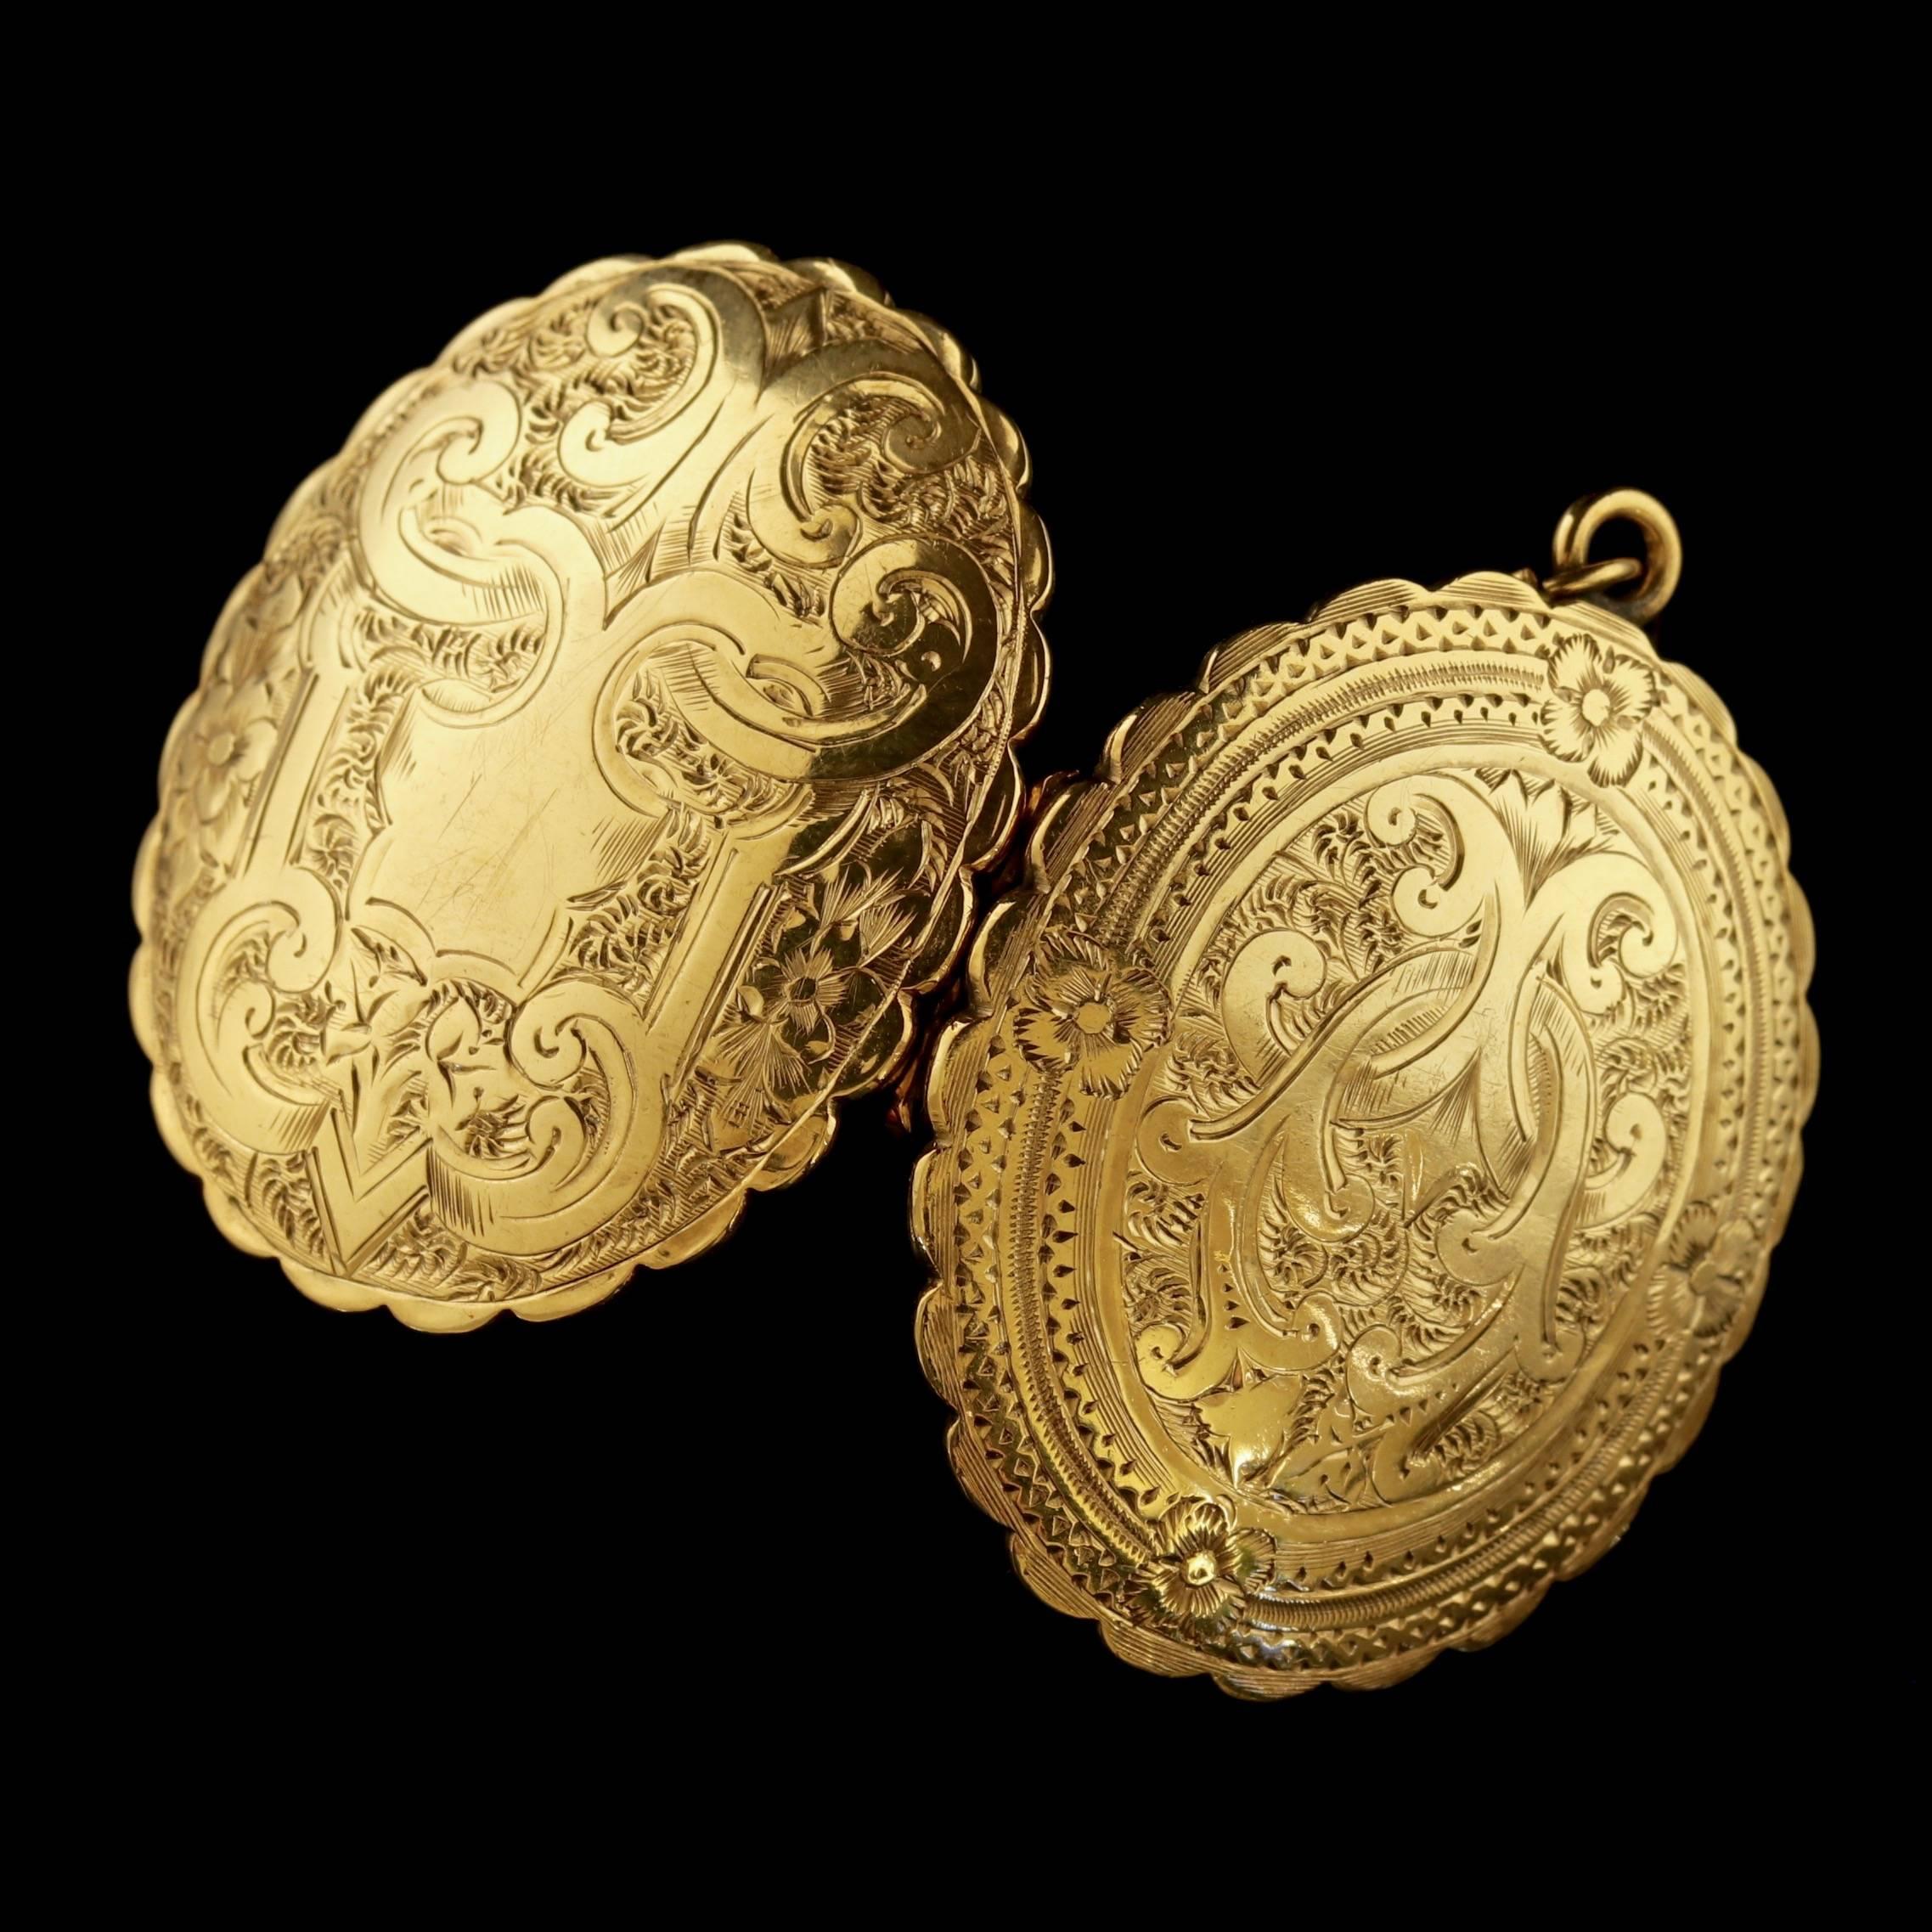 Women's Antique Victorian Mourning Locket 18 Carat Gold Back and Front, circa 1840